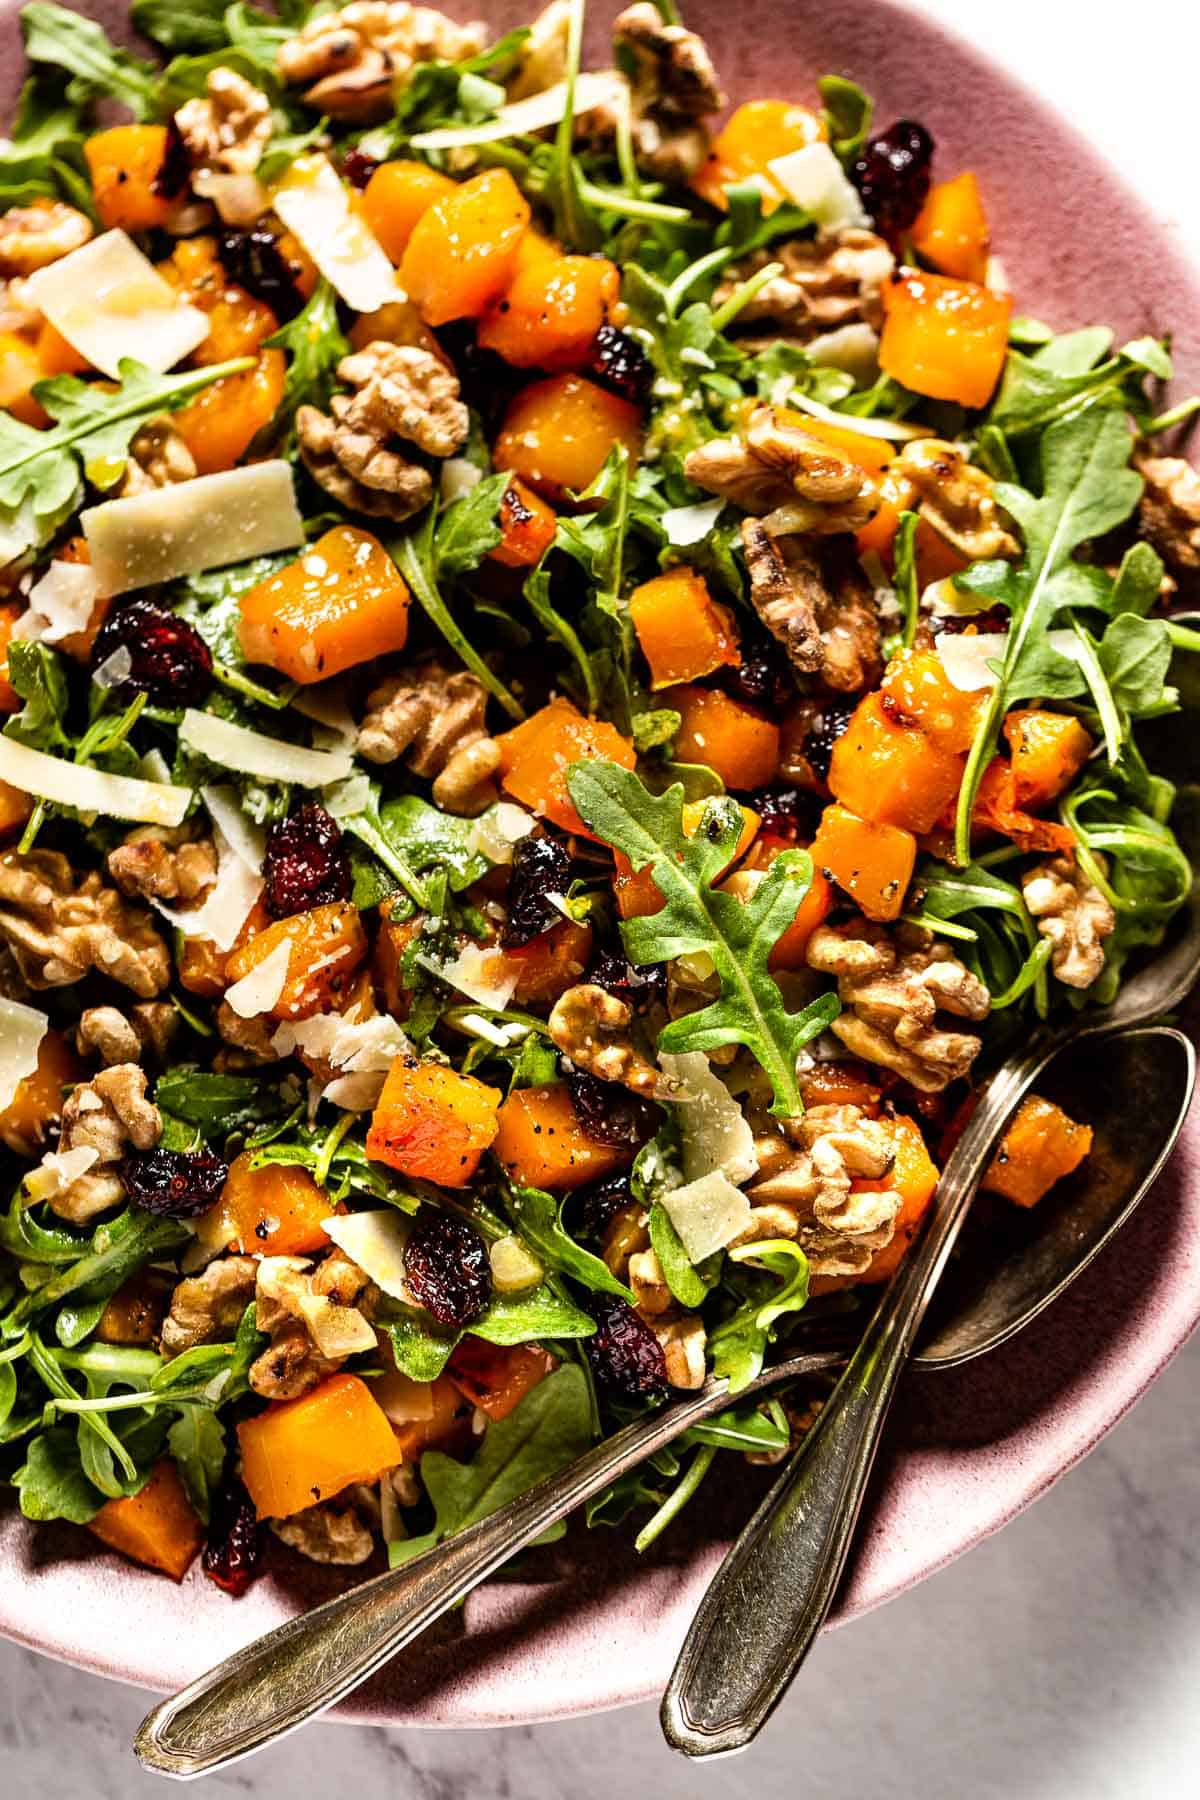 Butternut squash salad on a plate from the top view.